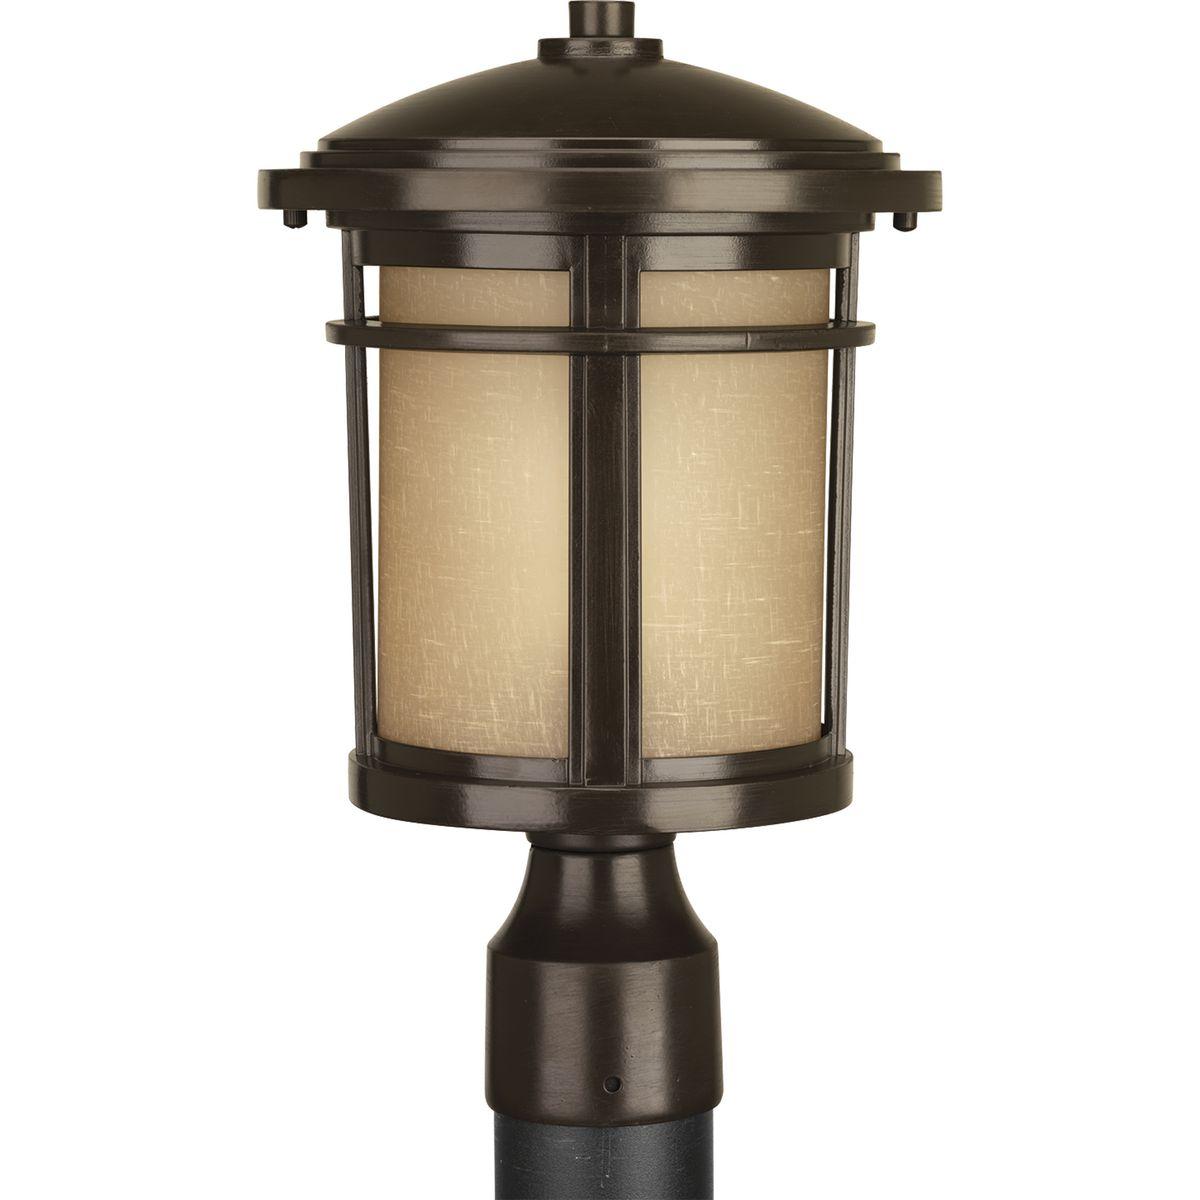 Hubbell P6424-2030K9 LED post lantern with etched umber linen glass. Fits 3" posts order separately. 120V AC replaceable LED module, 623 lumens (source), 3000K color temperature and 90+ CRI.  ; Etched umber linen glass. ; Replaceable LED module. ; Powder coated finish. ; Meet